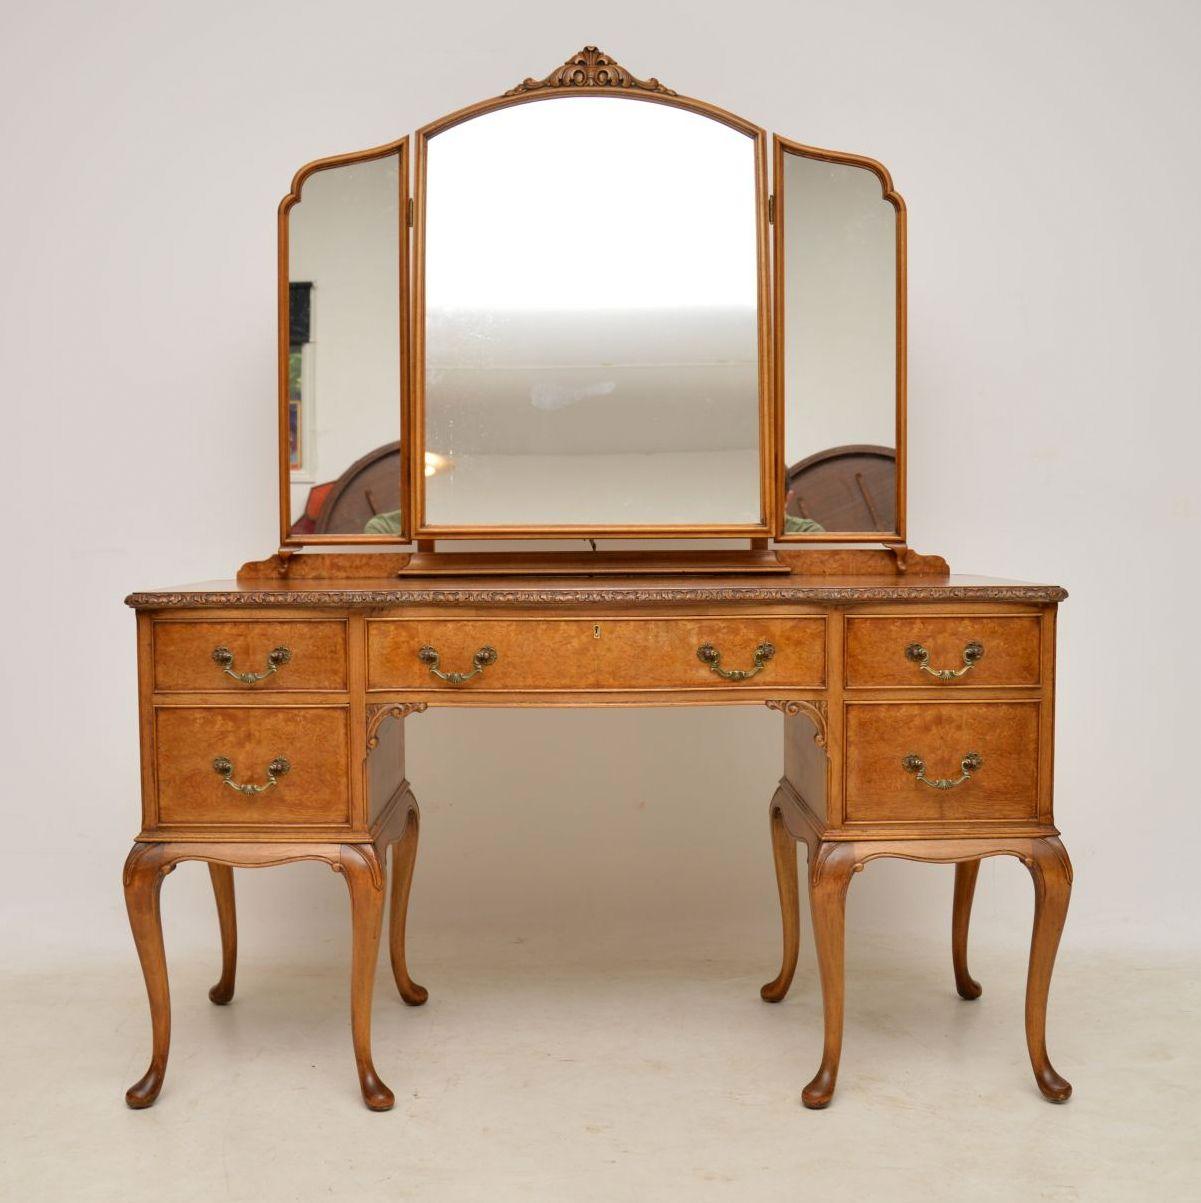 These antique dressing tables are becoming very hard to find these days & they seem to be very popular. This one is a great model & is in excellent condition having just been re-polished. It’s burr maple & walnut, with triple adjustable mirrors,